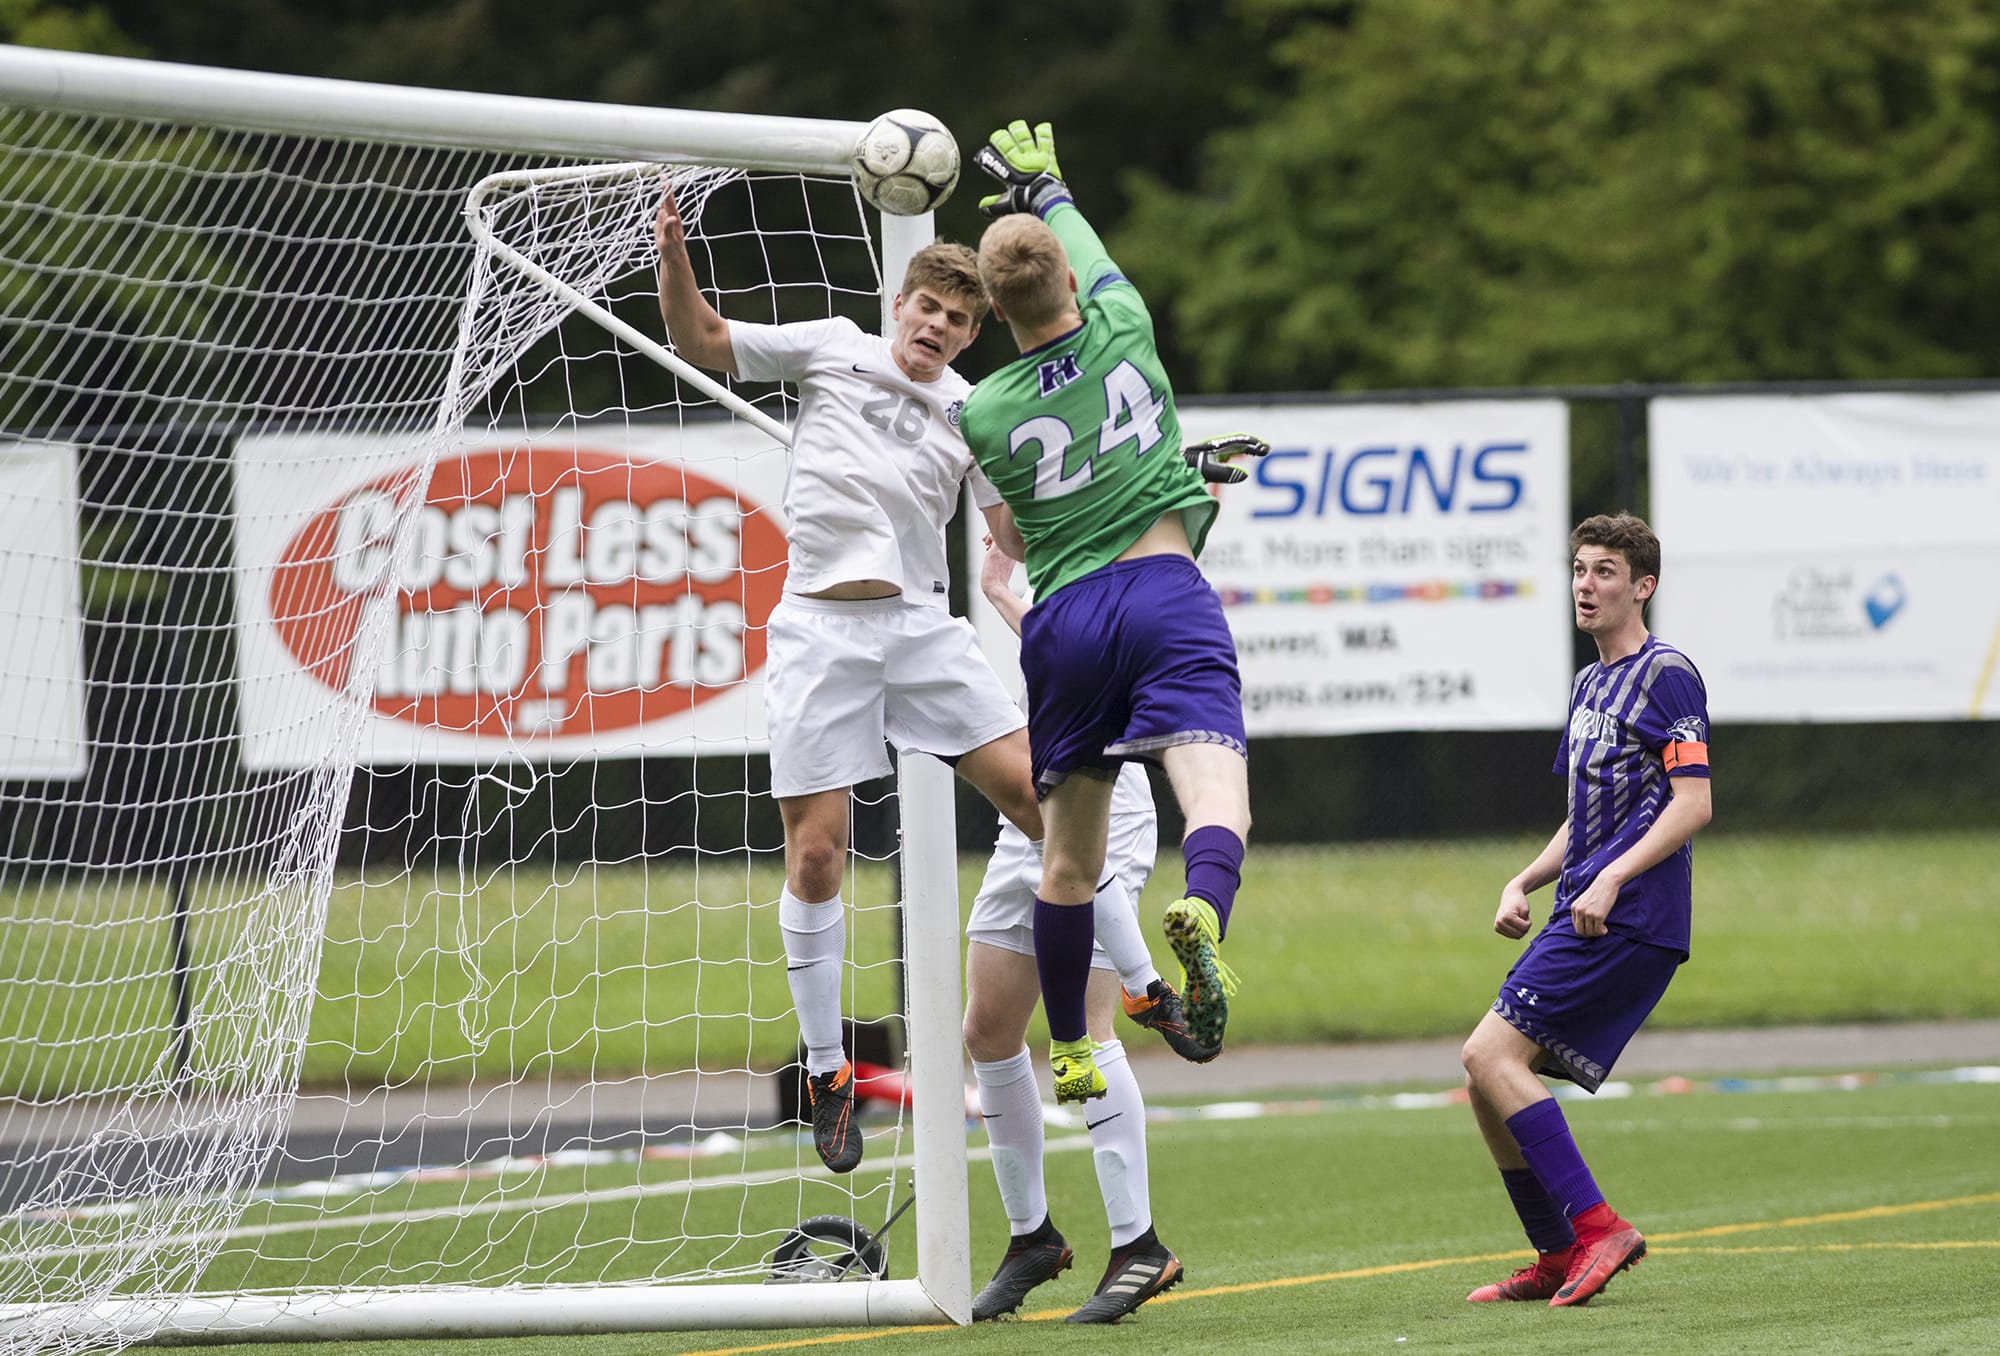 Heritage's goalie Robbie Meadors (24) attempts to block a goal from Skyview during the 4A GSHL boys soccer match at Kiggins Bowl, Monday May 1, 2018. The goal made Skyview tied with Heritage in the first half.